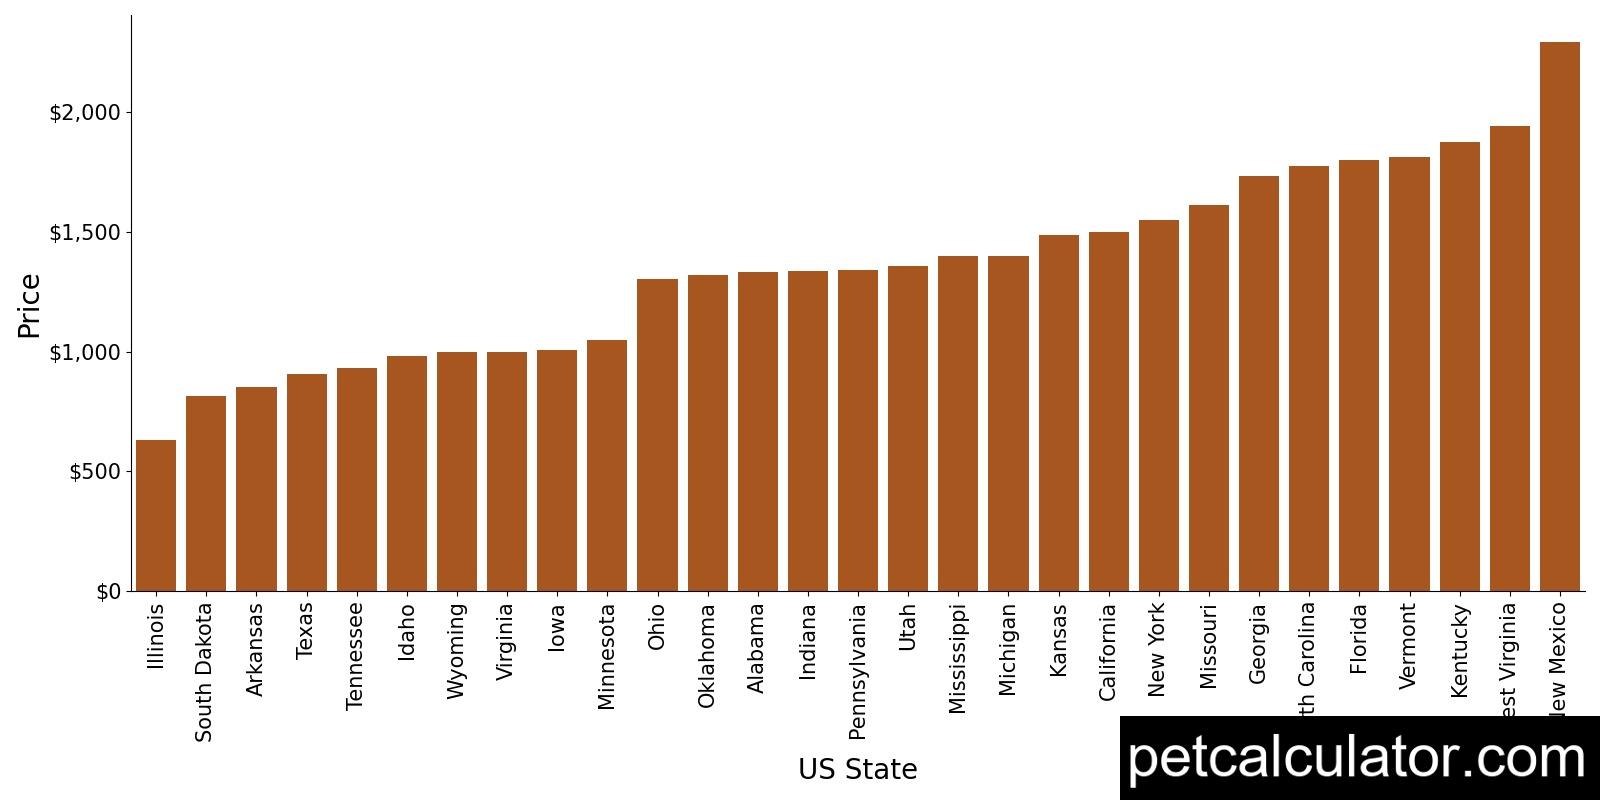 Price of Airedale Terrier by US State 